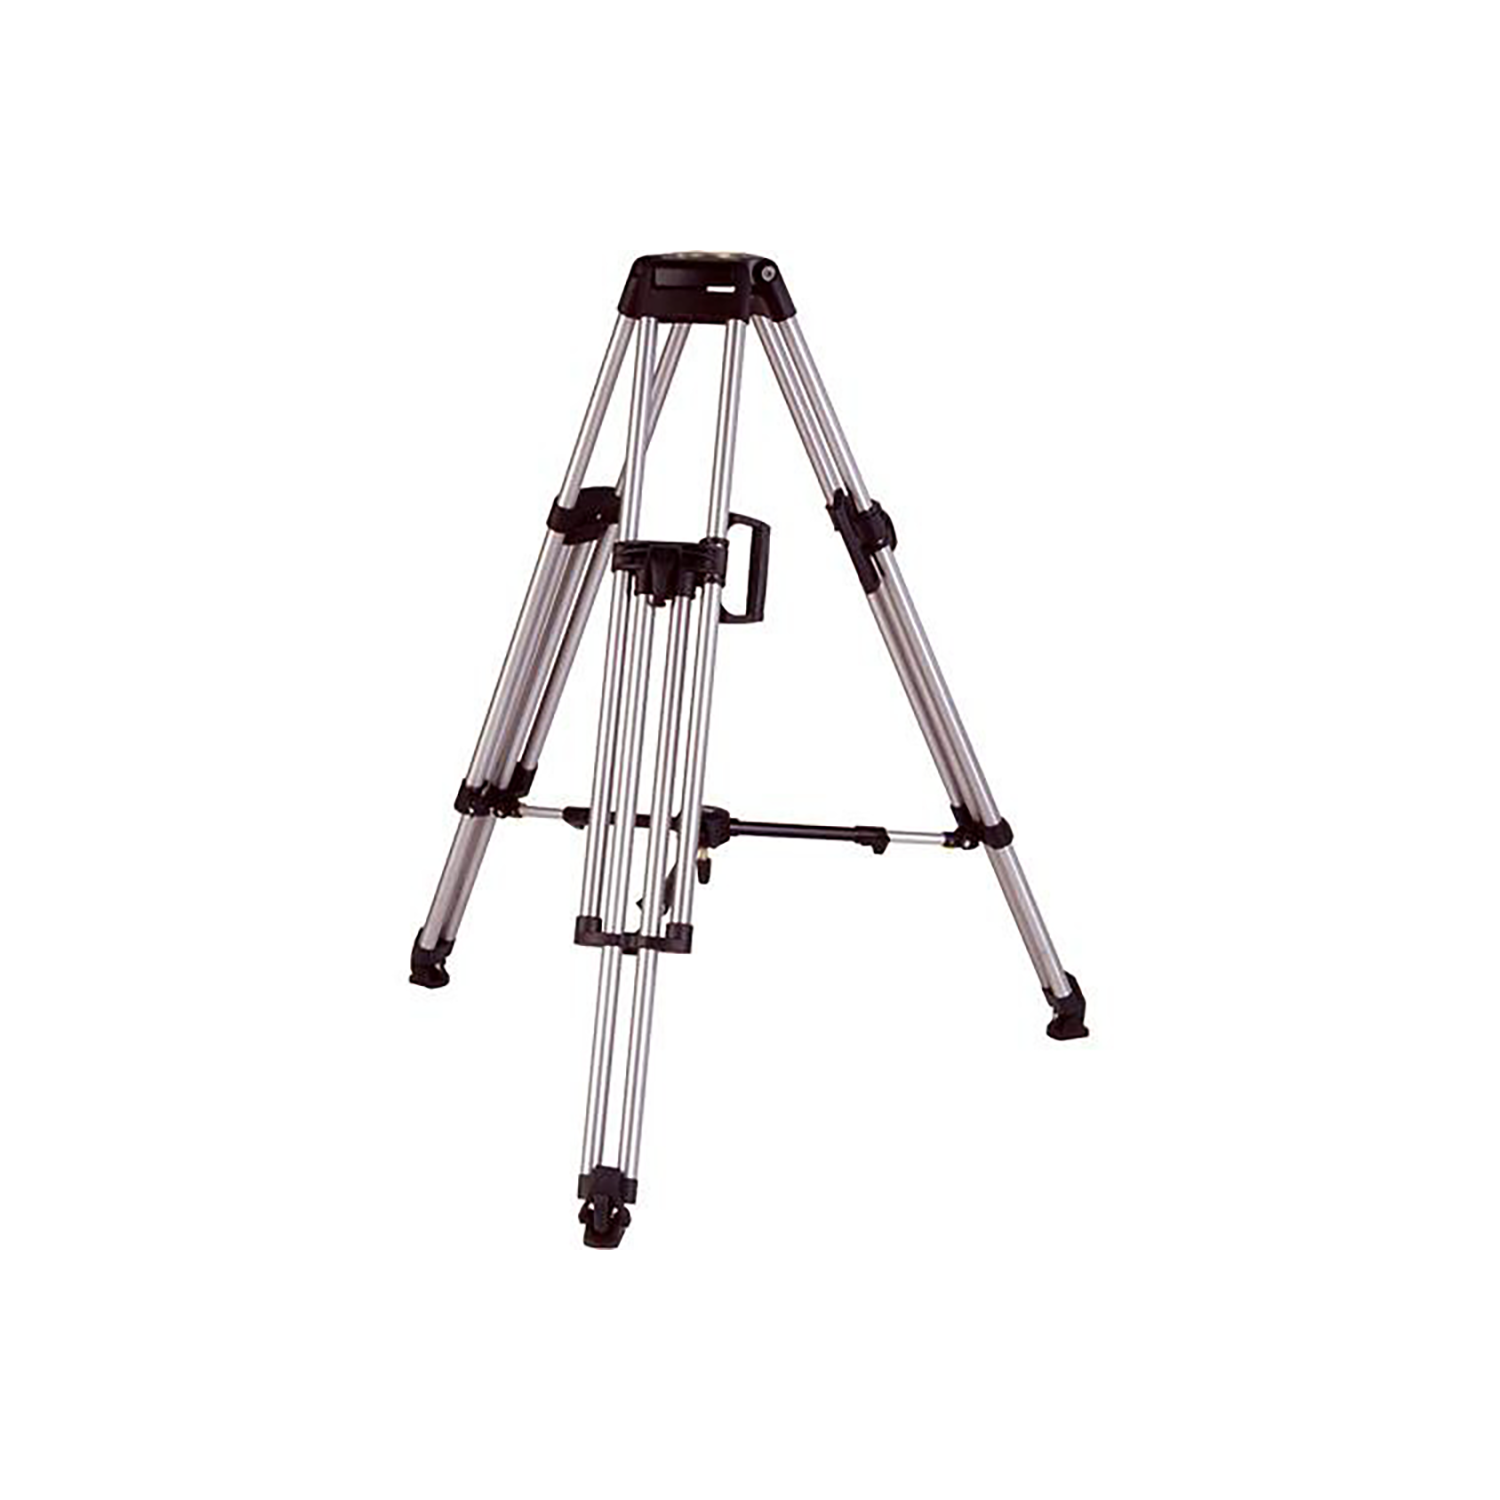 MILLER HD 1-St Studio Alloy Tripod to suit Studio Dolly systems